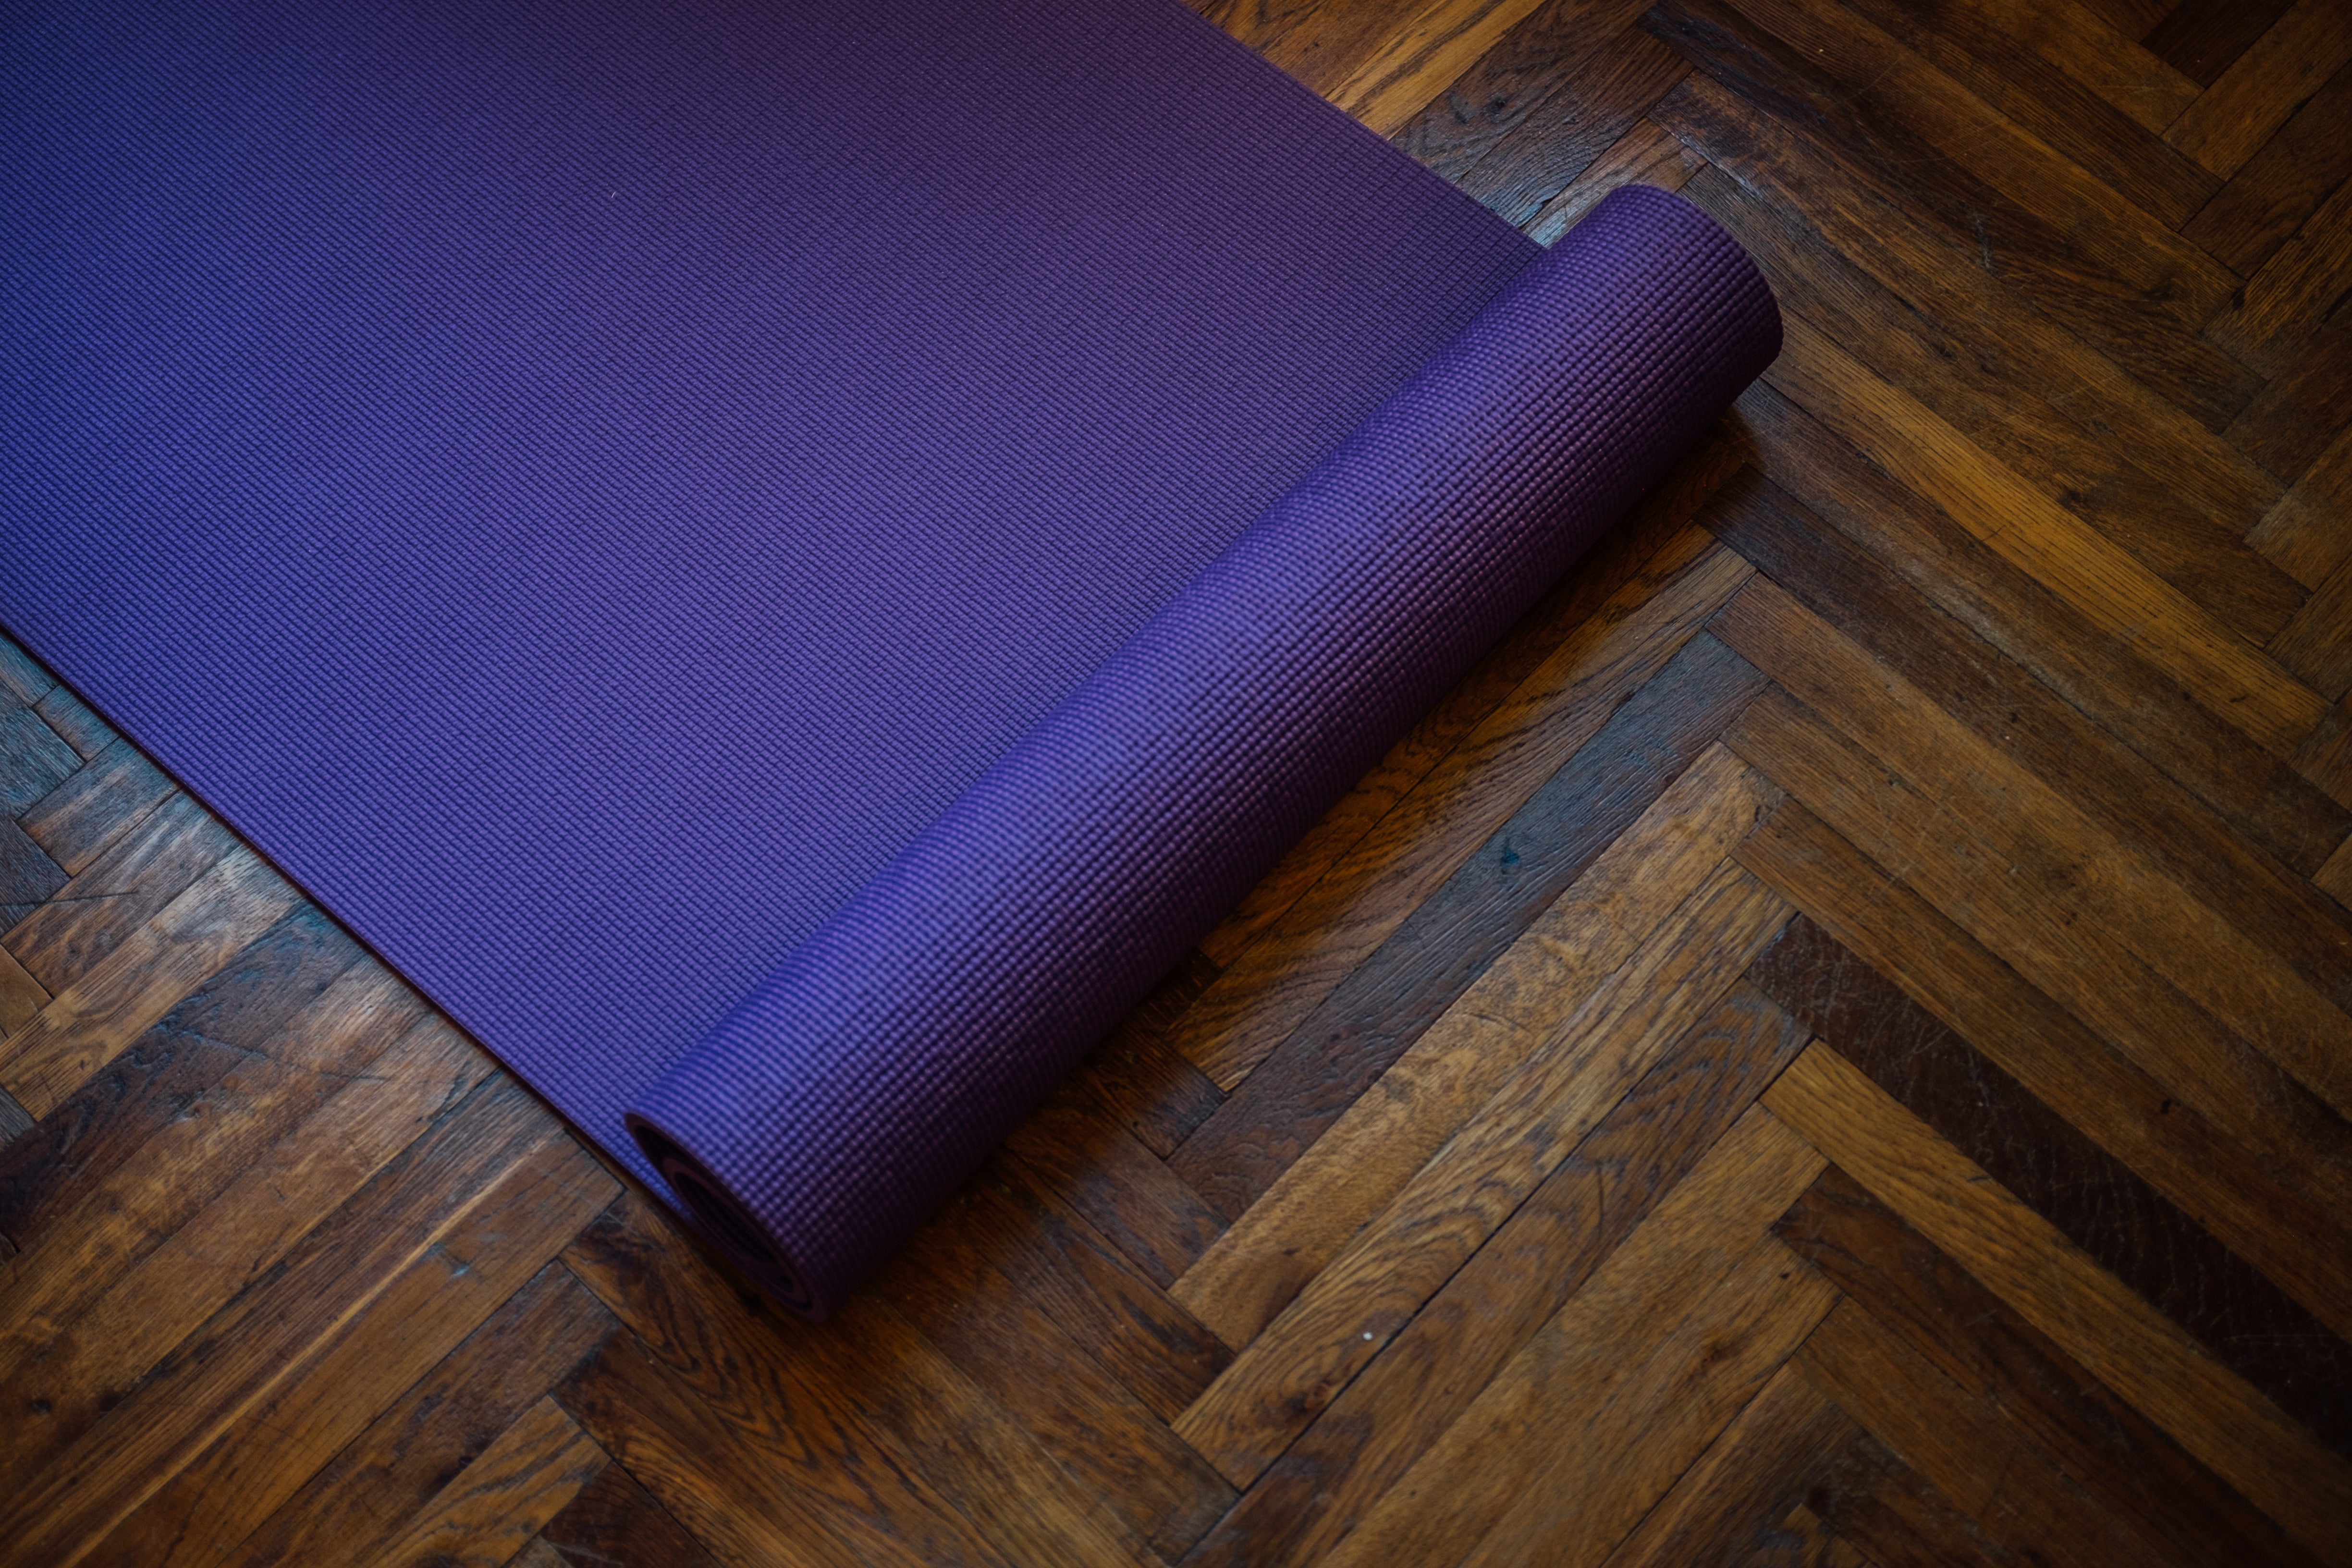 Browse Free HD Images of Purple Yoga Mat Partially Rolled On A Wooden Floor